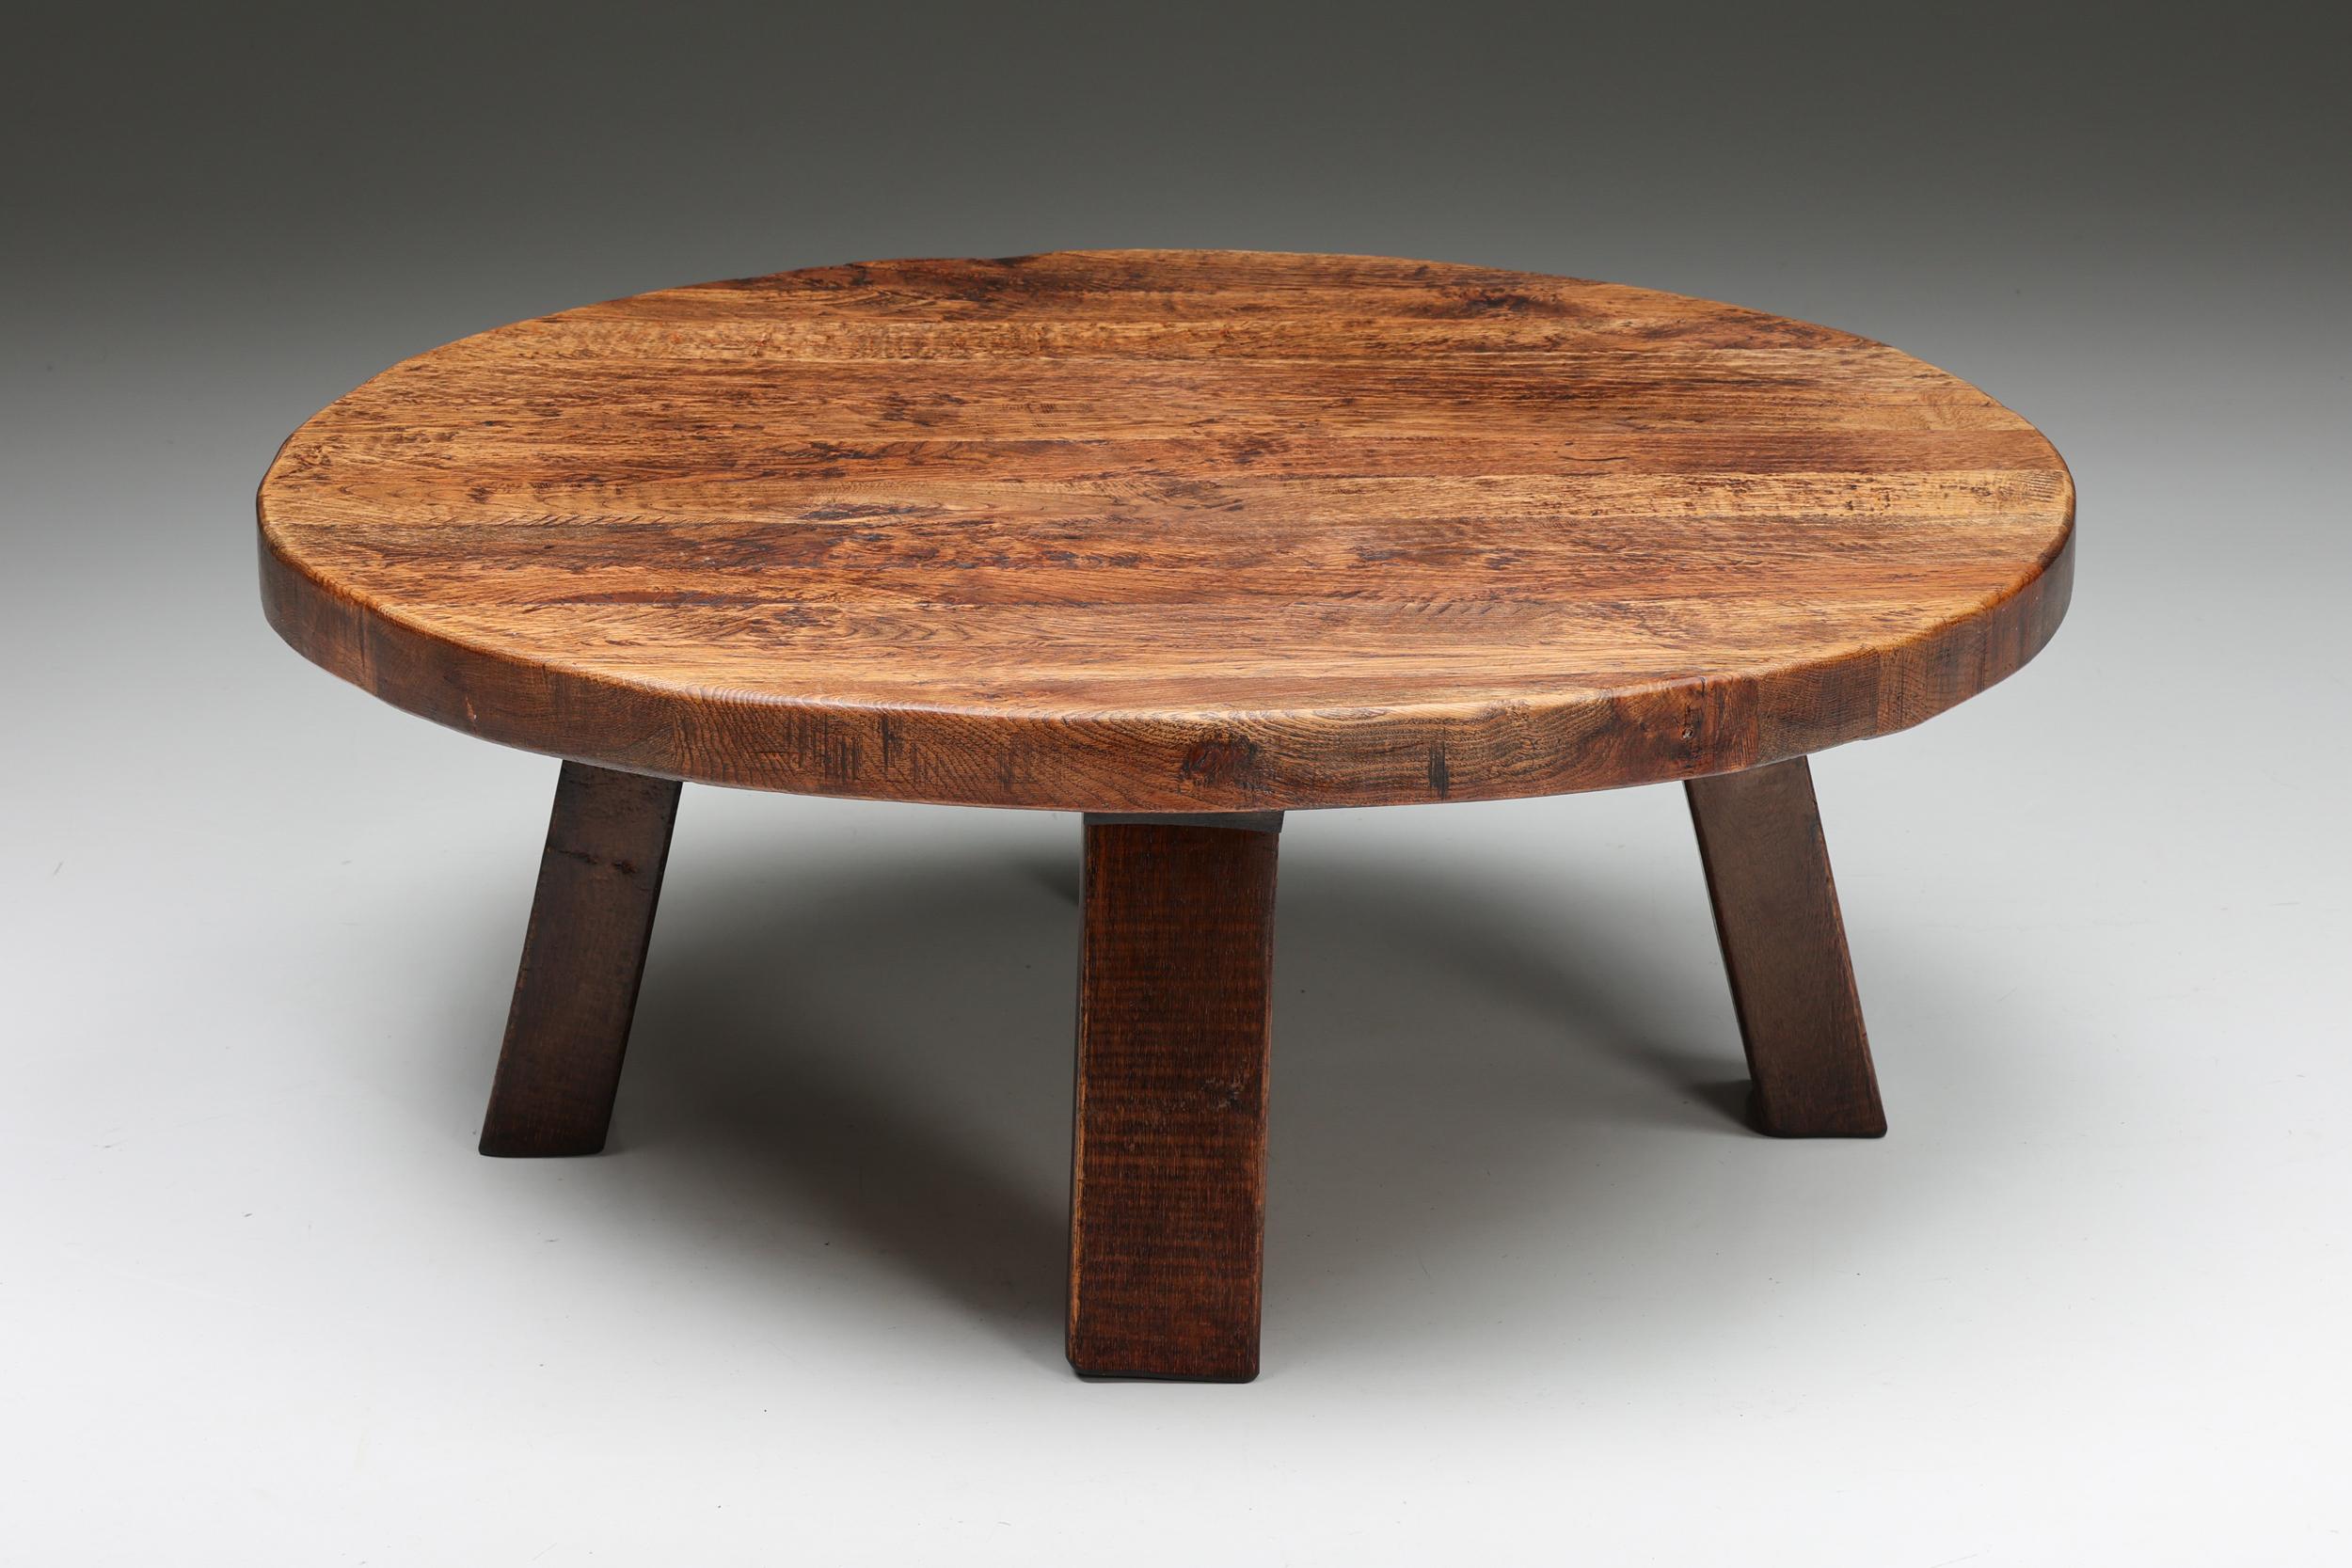 Rustic; Wabi-Sabi; Coffee table; side table; Wood; Patina; Mid-century modern; Belgian; Craftsmanship;

Rustic round coffee table with a four-legged base. The rounded top makes space for objects like magazines and other curiosities. Can also be